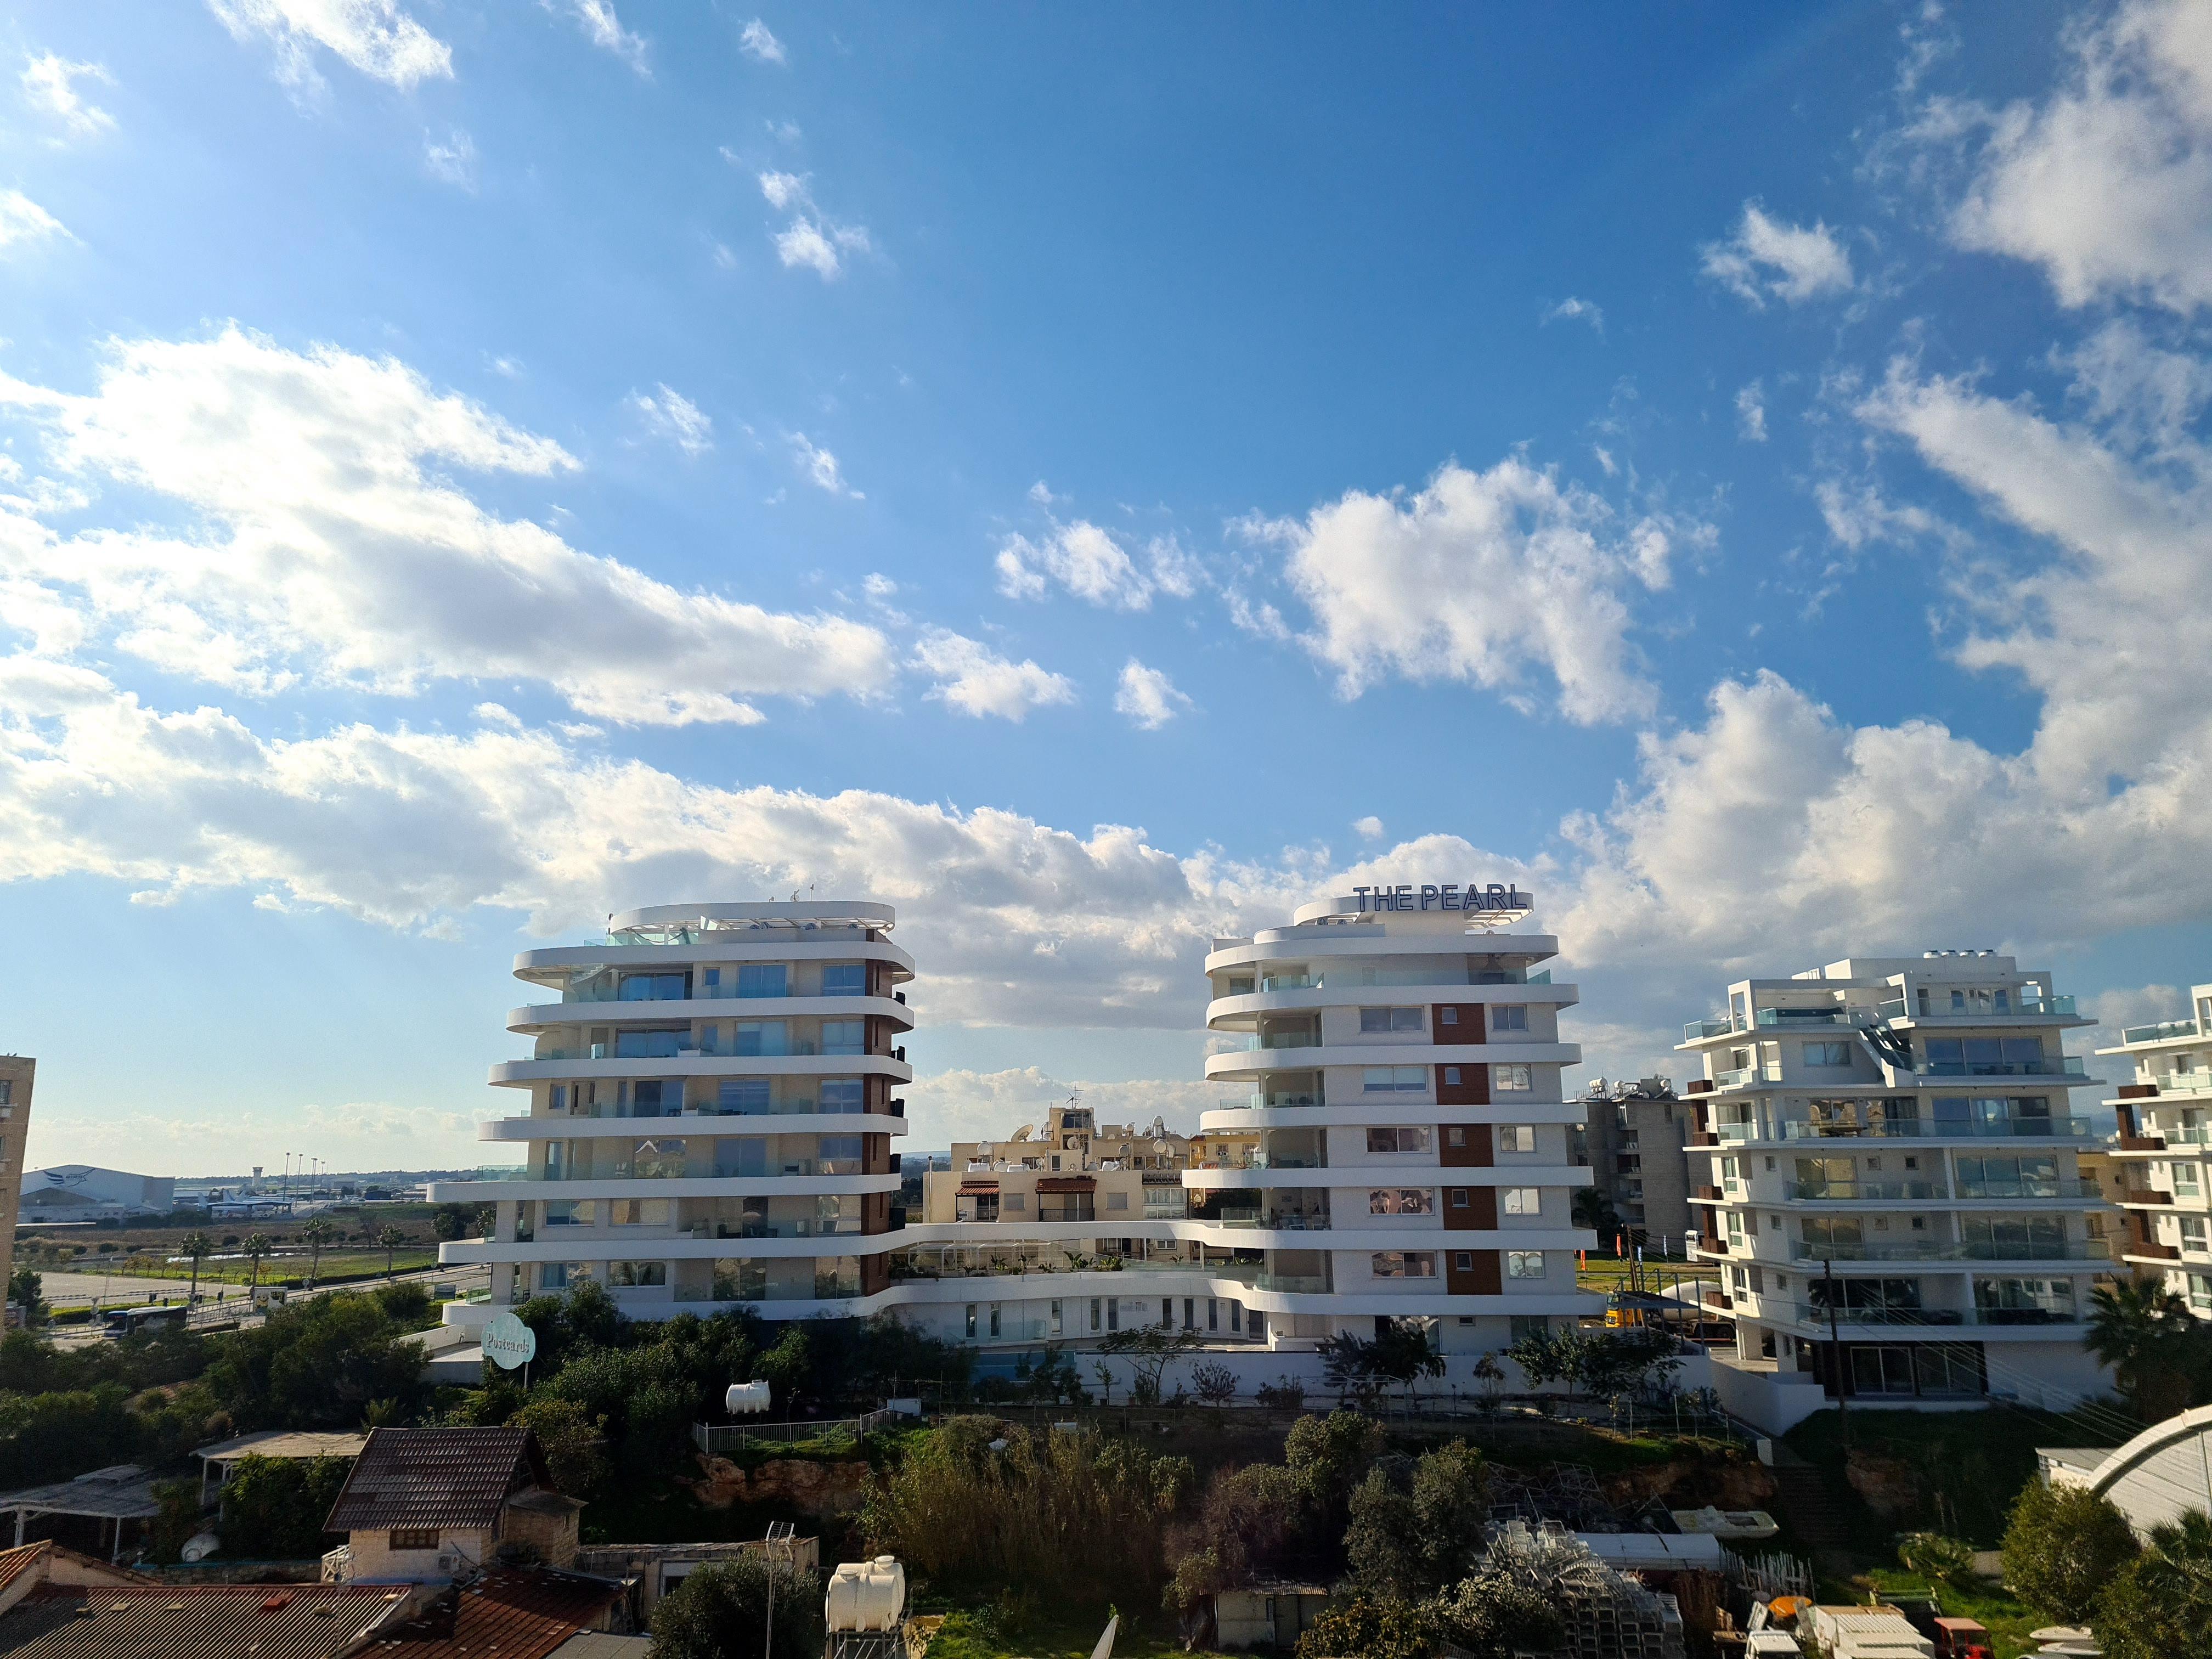 The Ciao Stelio Deluxe Hotel (Adults Only) Larnaca Bagian luar foto